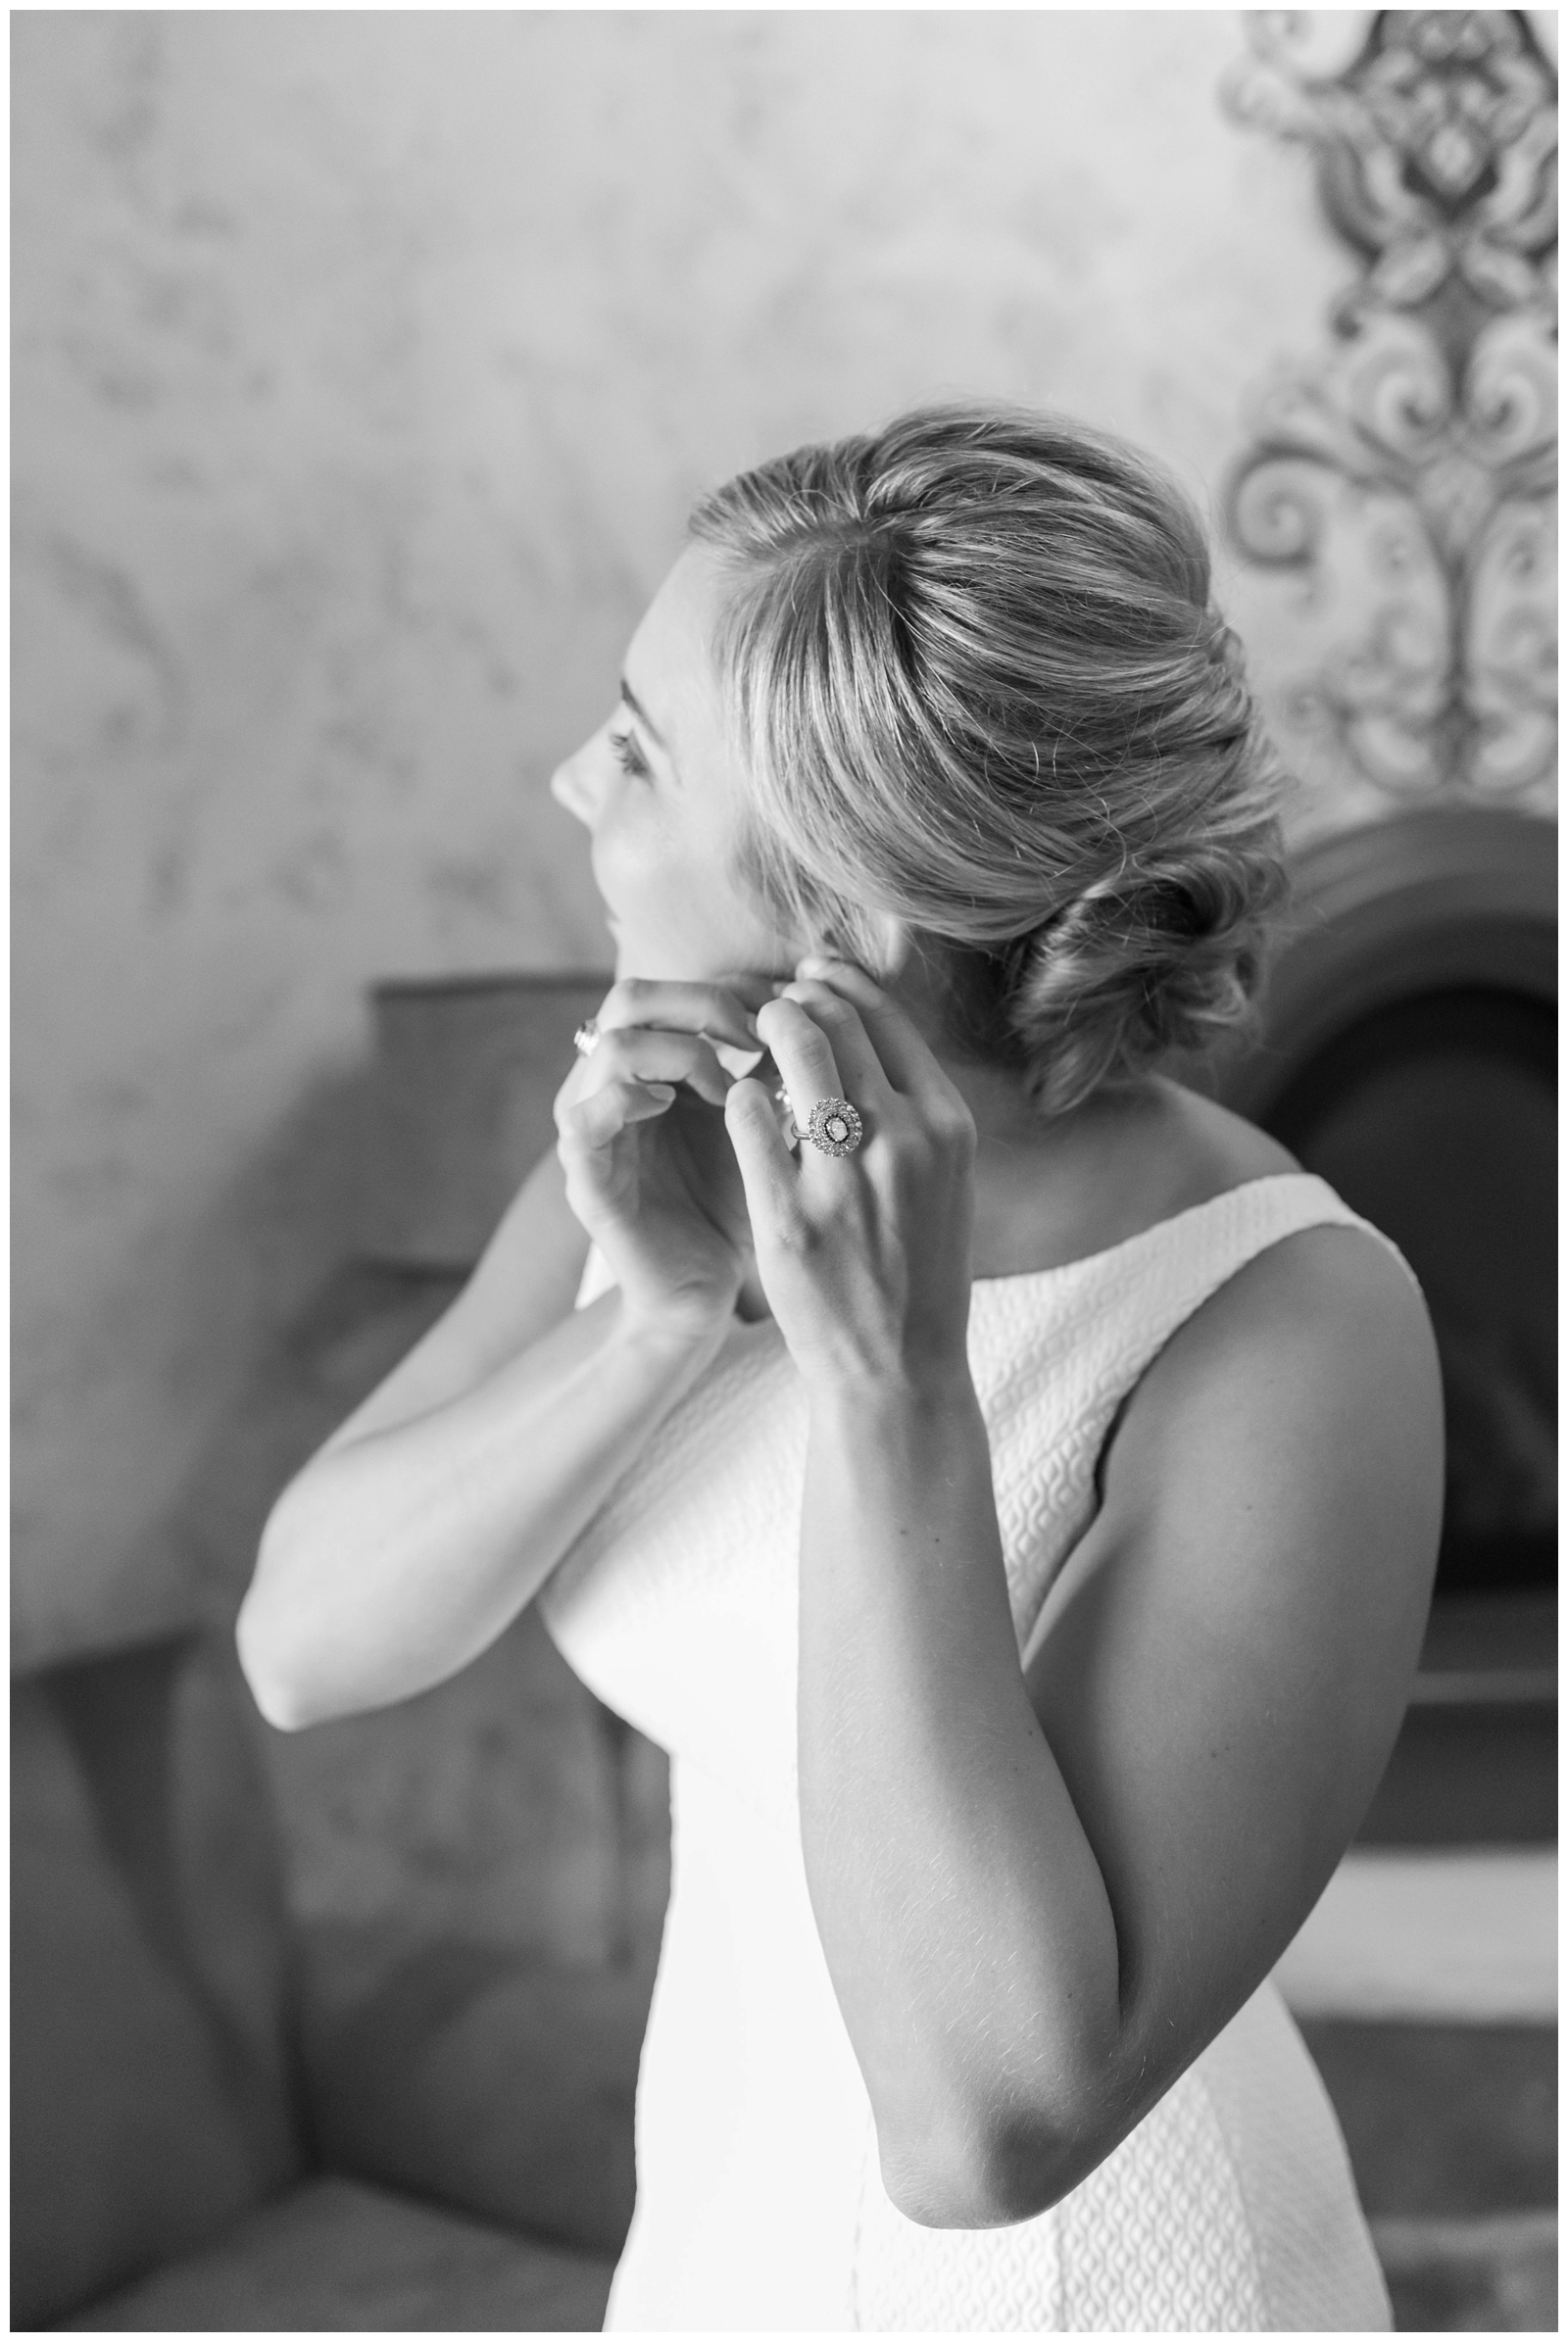 black and white portrait of bride adjusting earring in wedding dress photographed by Pipers Photography